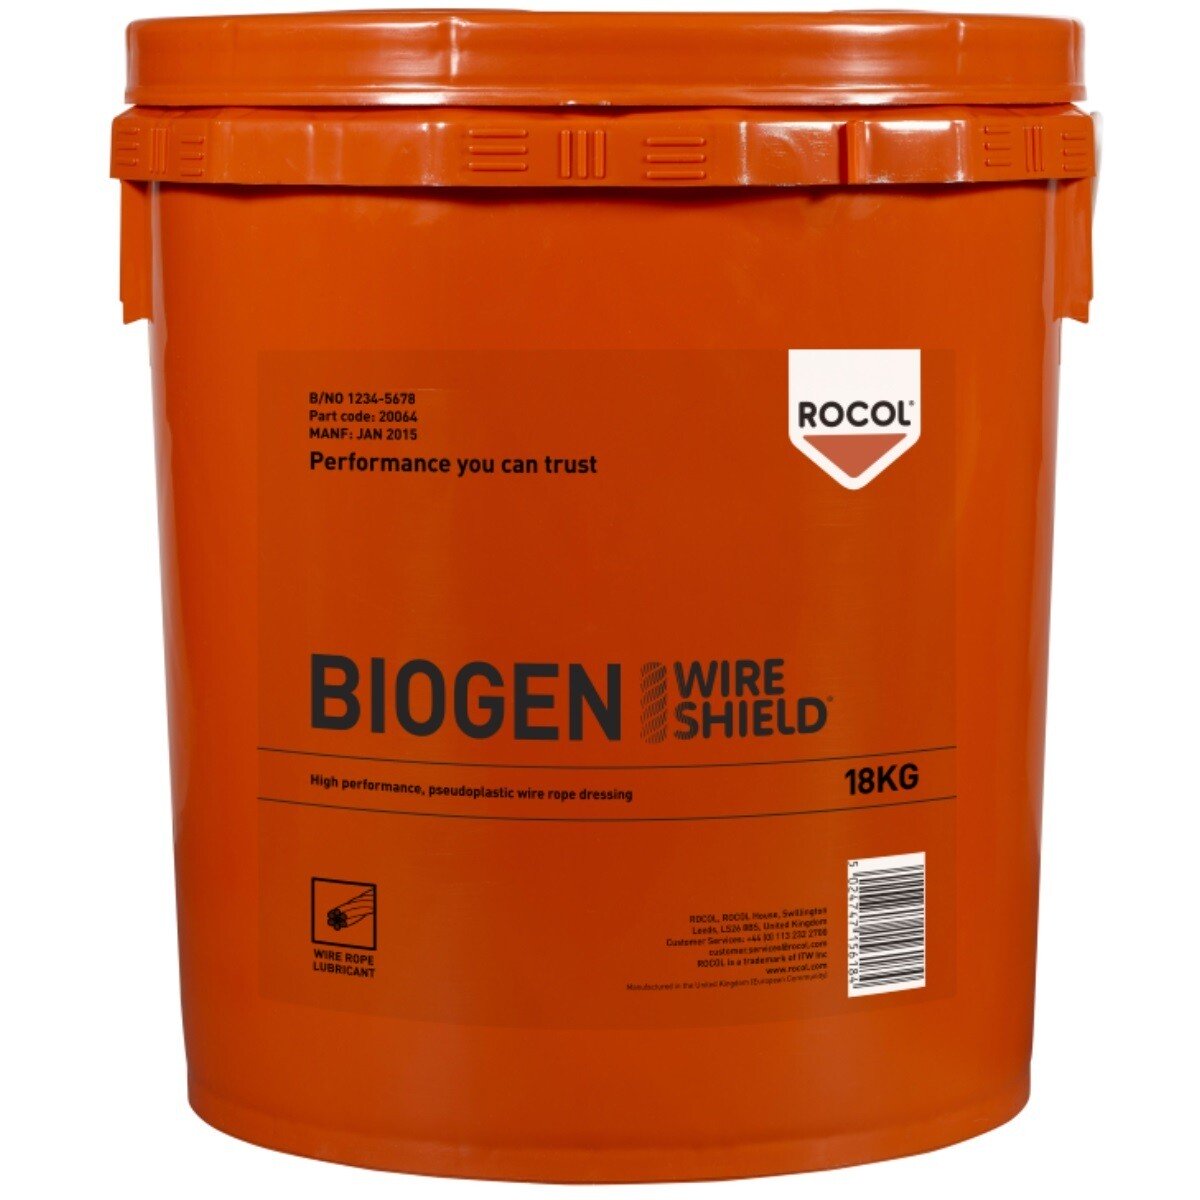 Rocol 20064 Biogen Wireshield VGP Compliant Lubricant for Wire Ropes and ROV Umbilicals 18kg